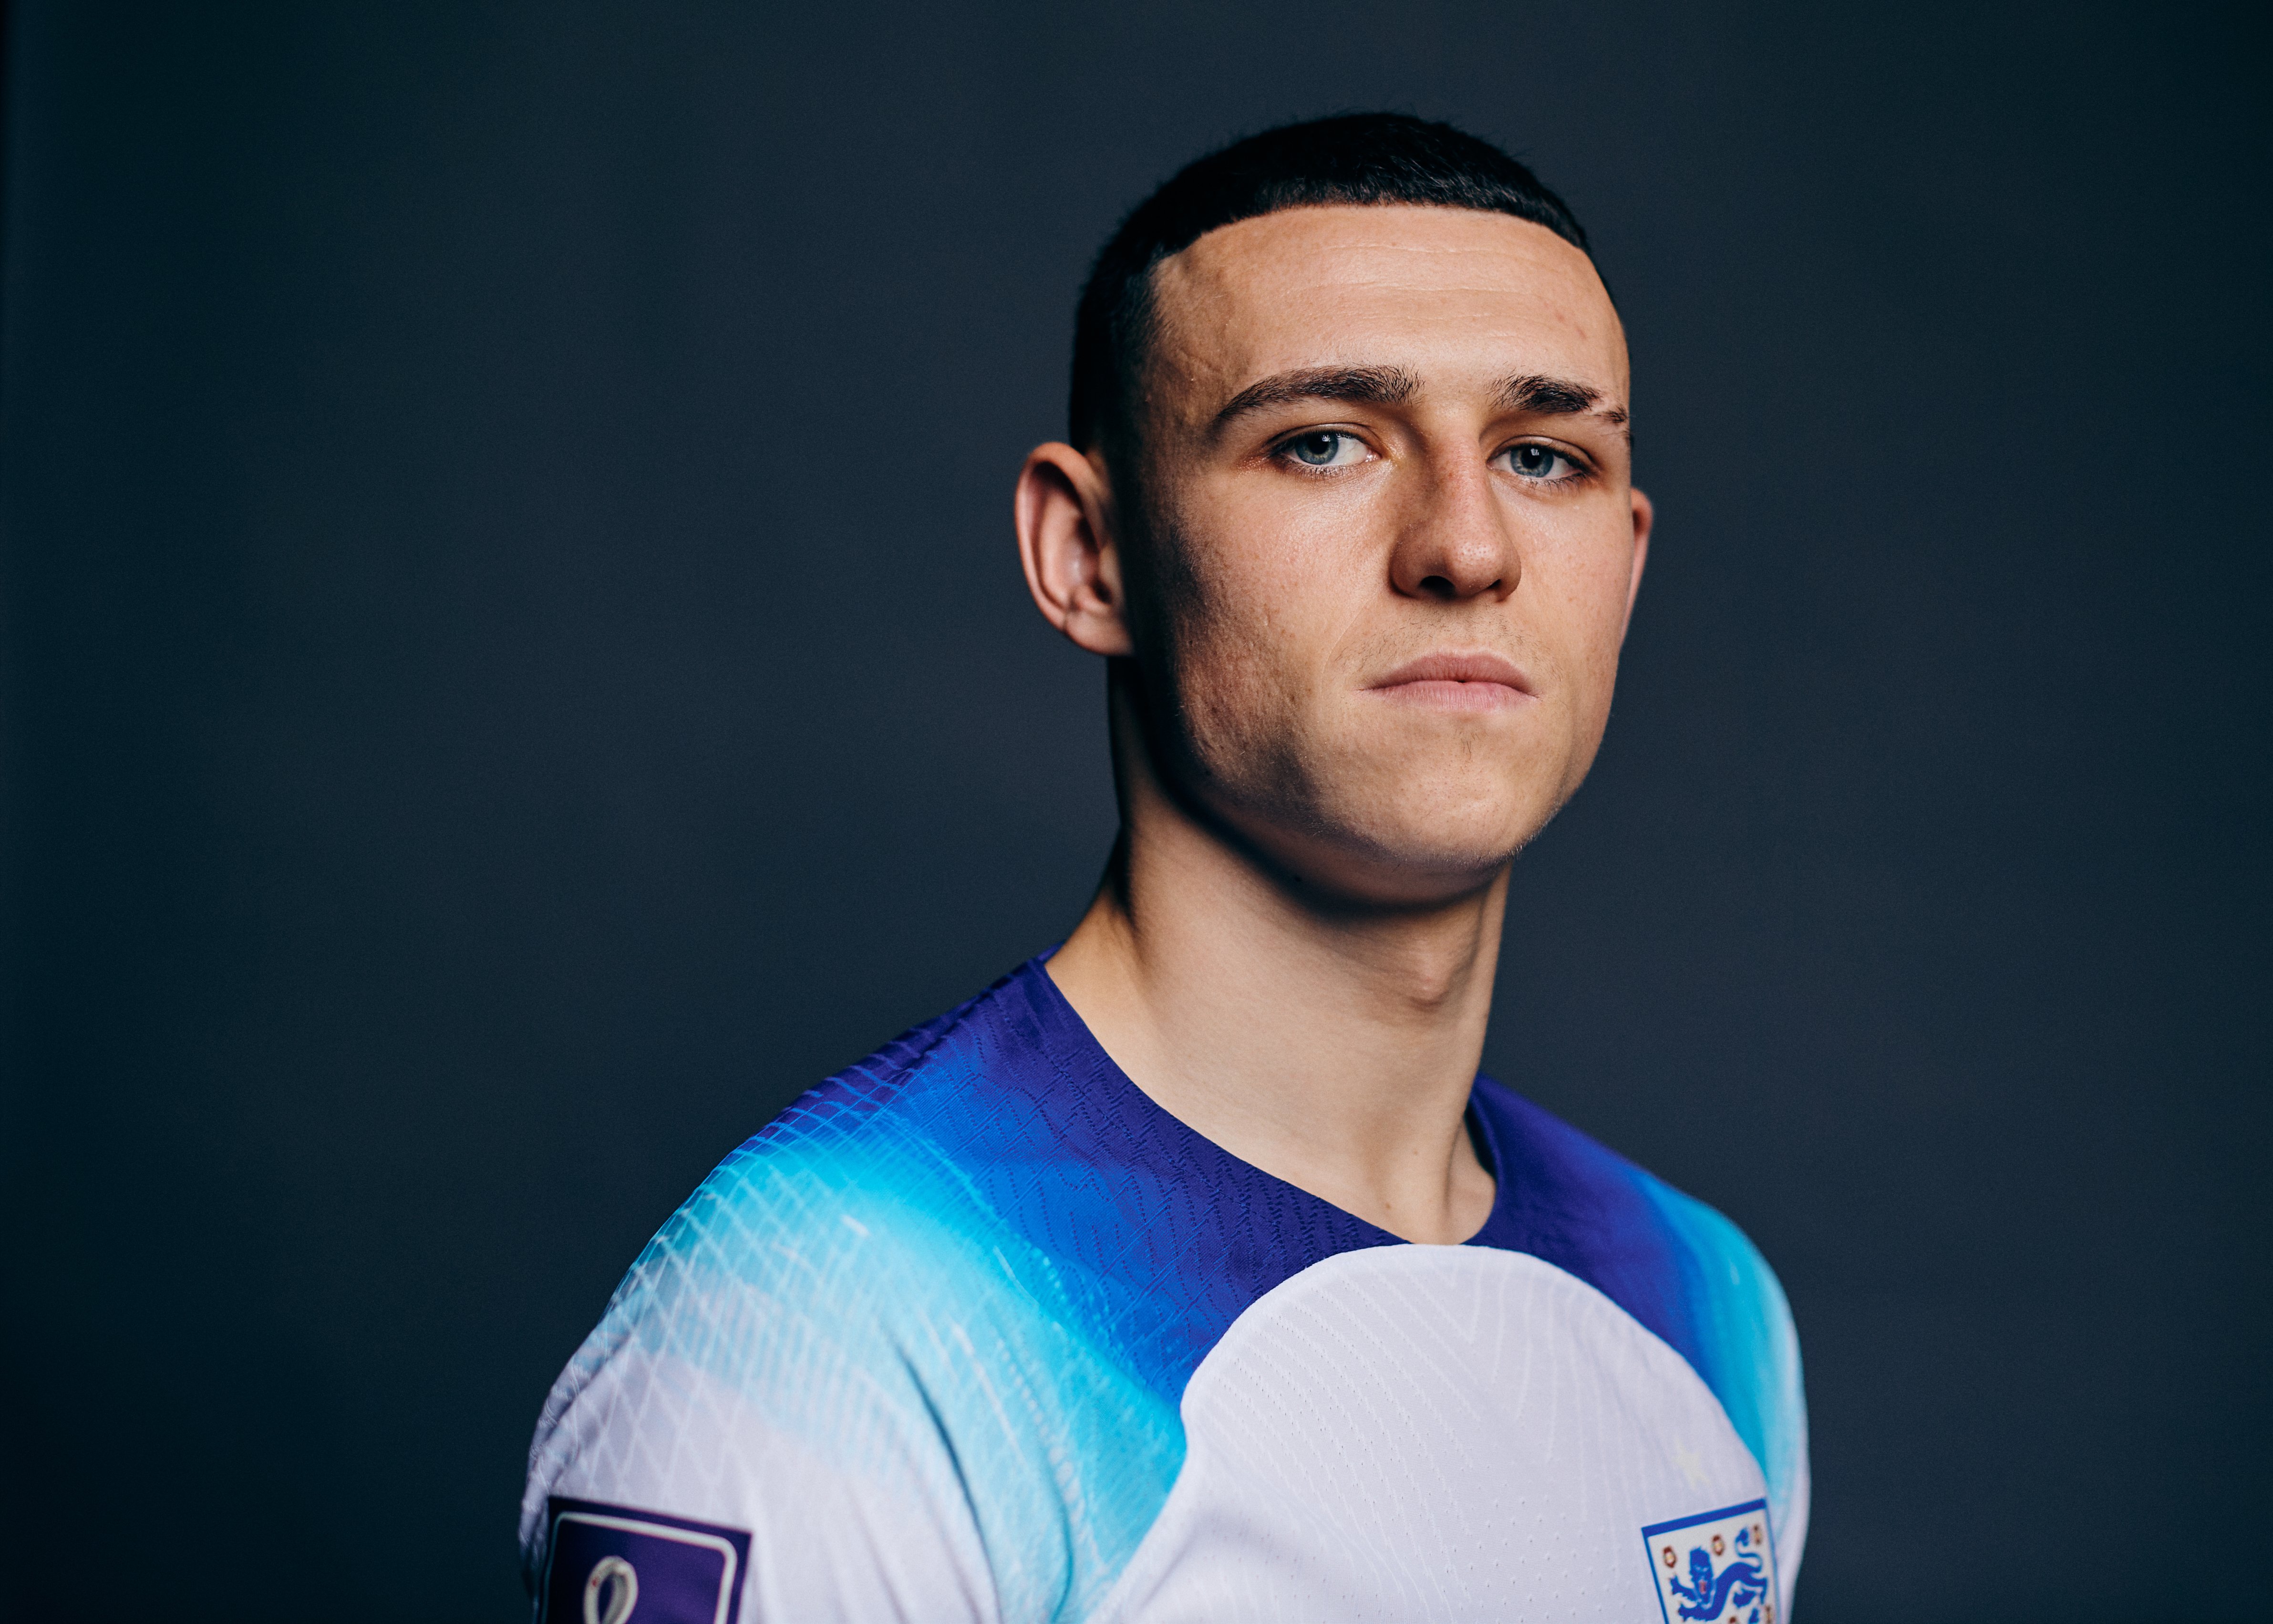 Phil Foden during the official FIFA World Cup Qatar 2022 portrait session on November 16, 2022, in Doha, Qatar. | Source: Getty Images